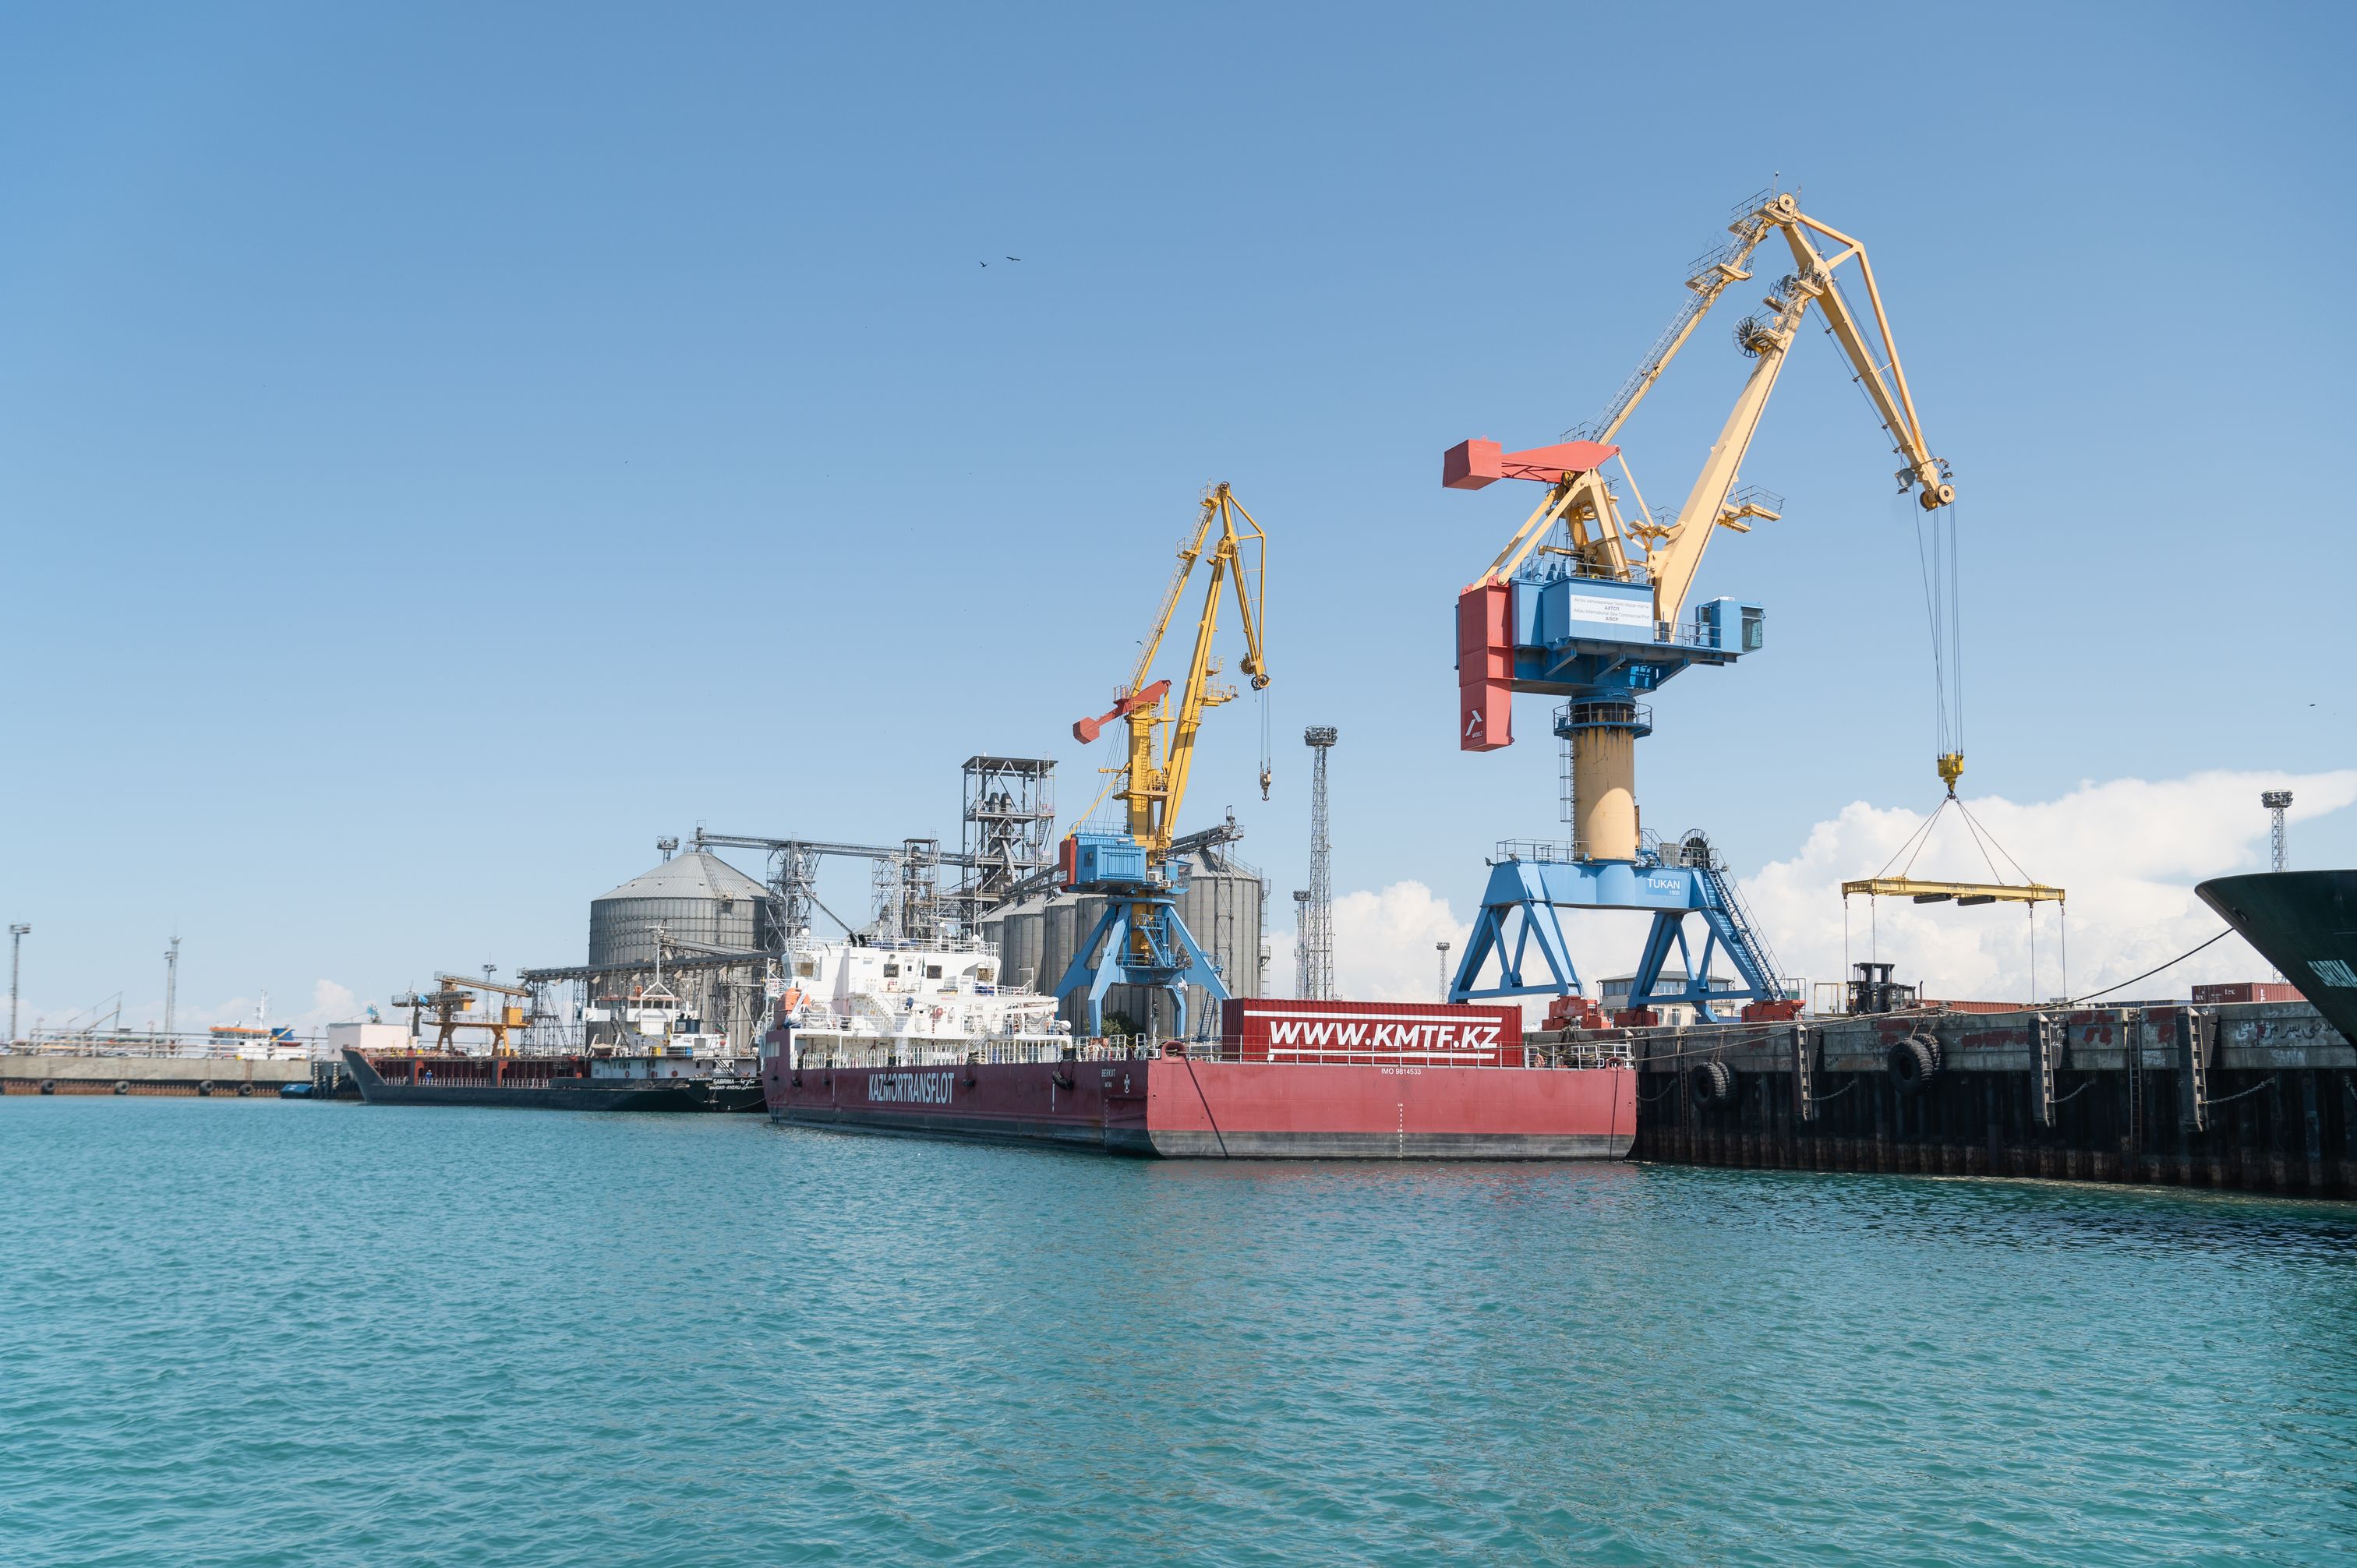 The port of Aktau in May this year set a record for the monthly volume of container transshipment